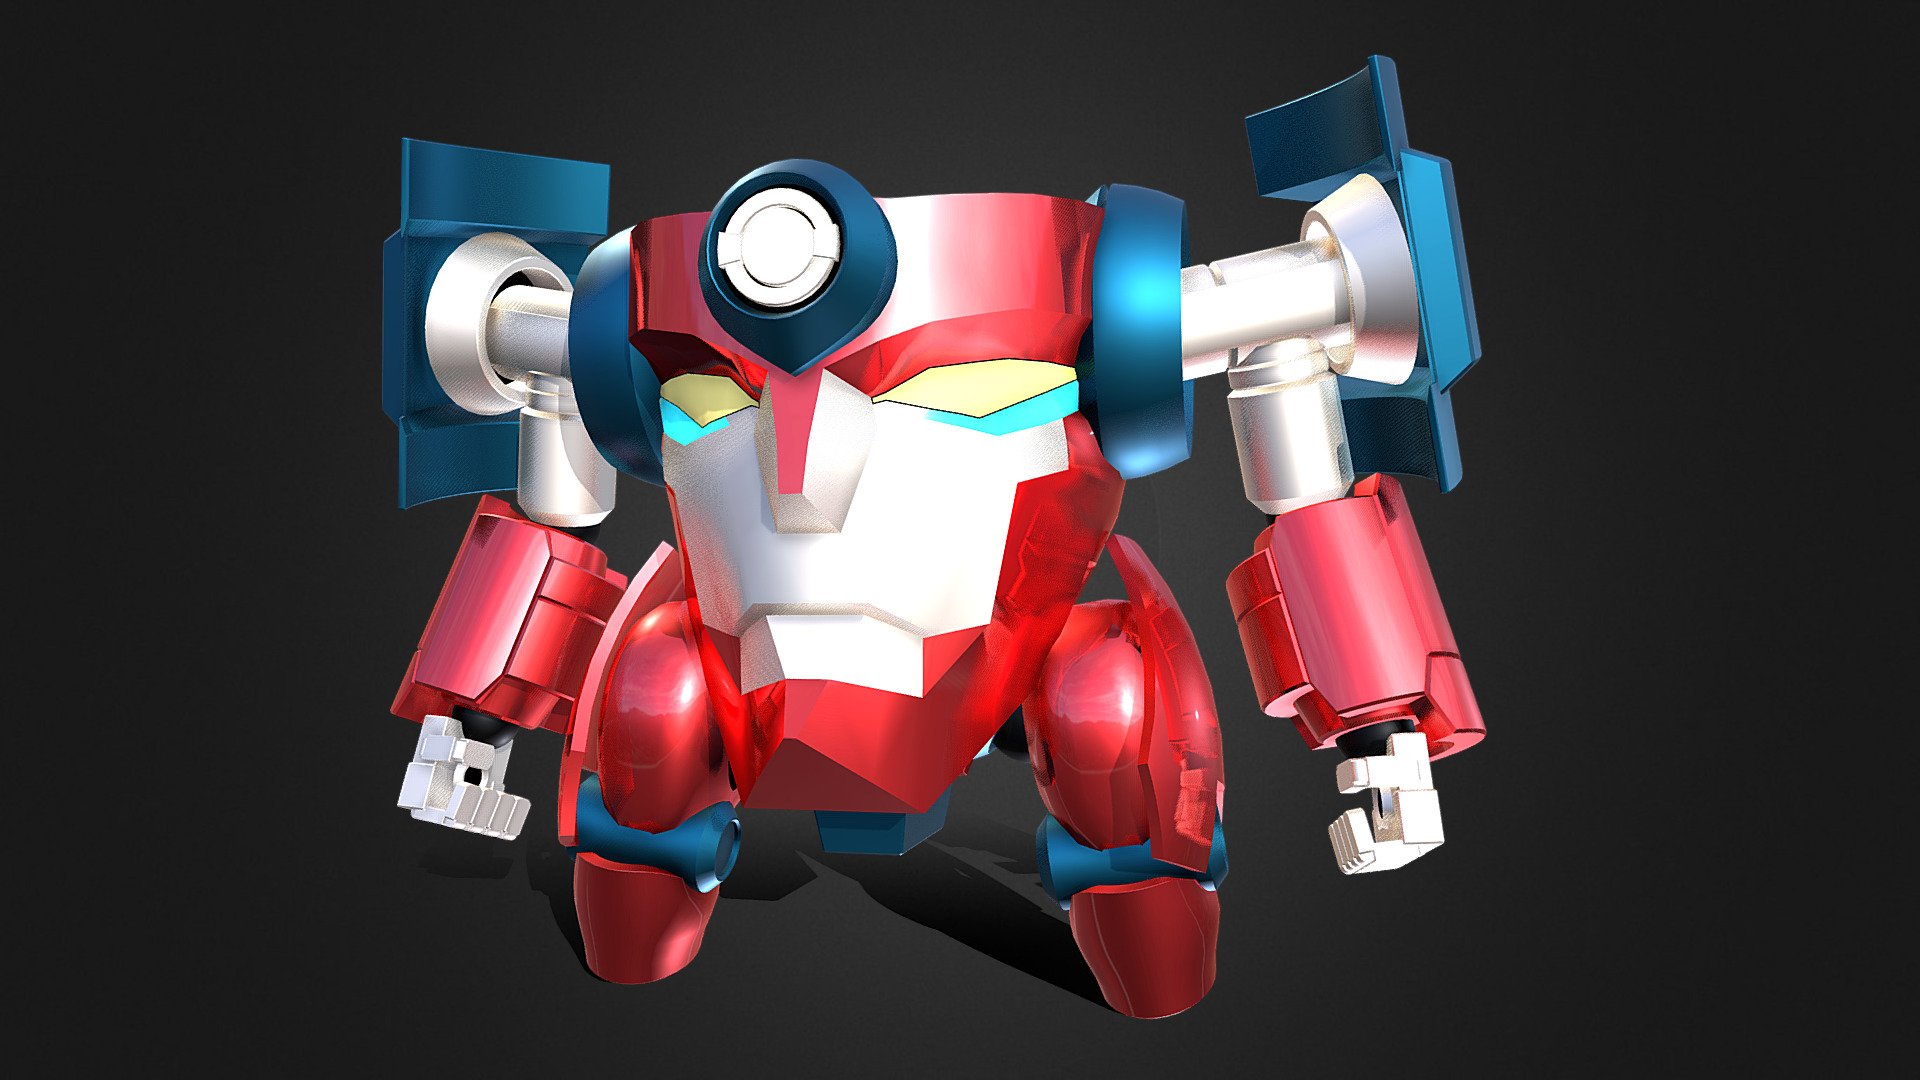 If you're interested in purchasing any of my models, contact me @ andrewdisaacs@yahoo.com

Simon's personal Ganmen from the anime Tengen Toppa Gurren Lagann.

Made in 3DS Max by myself 3d model